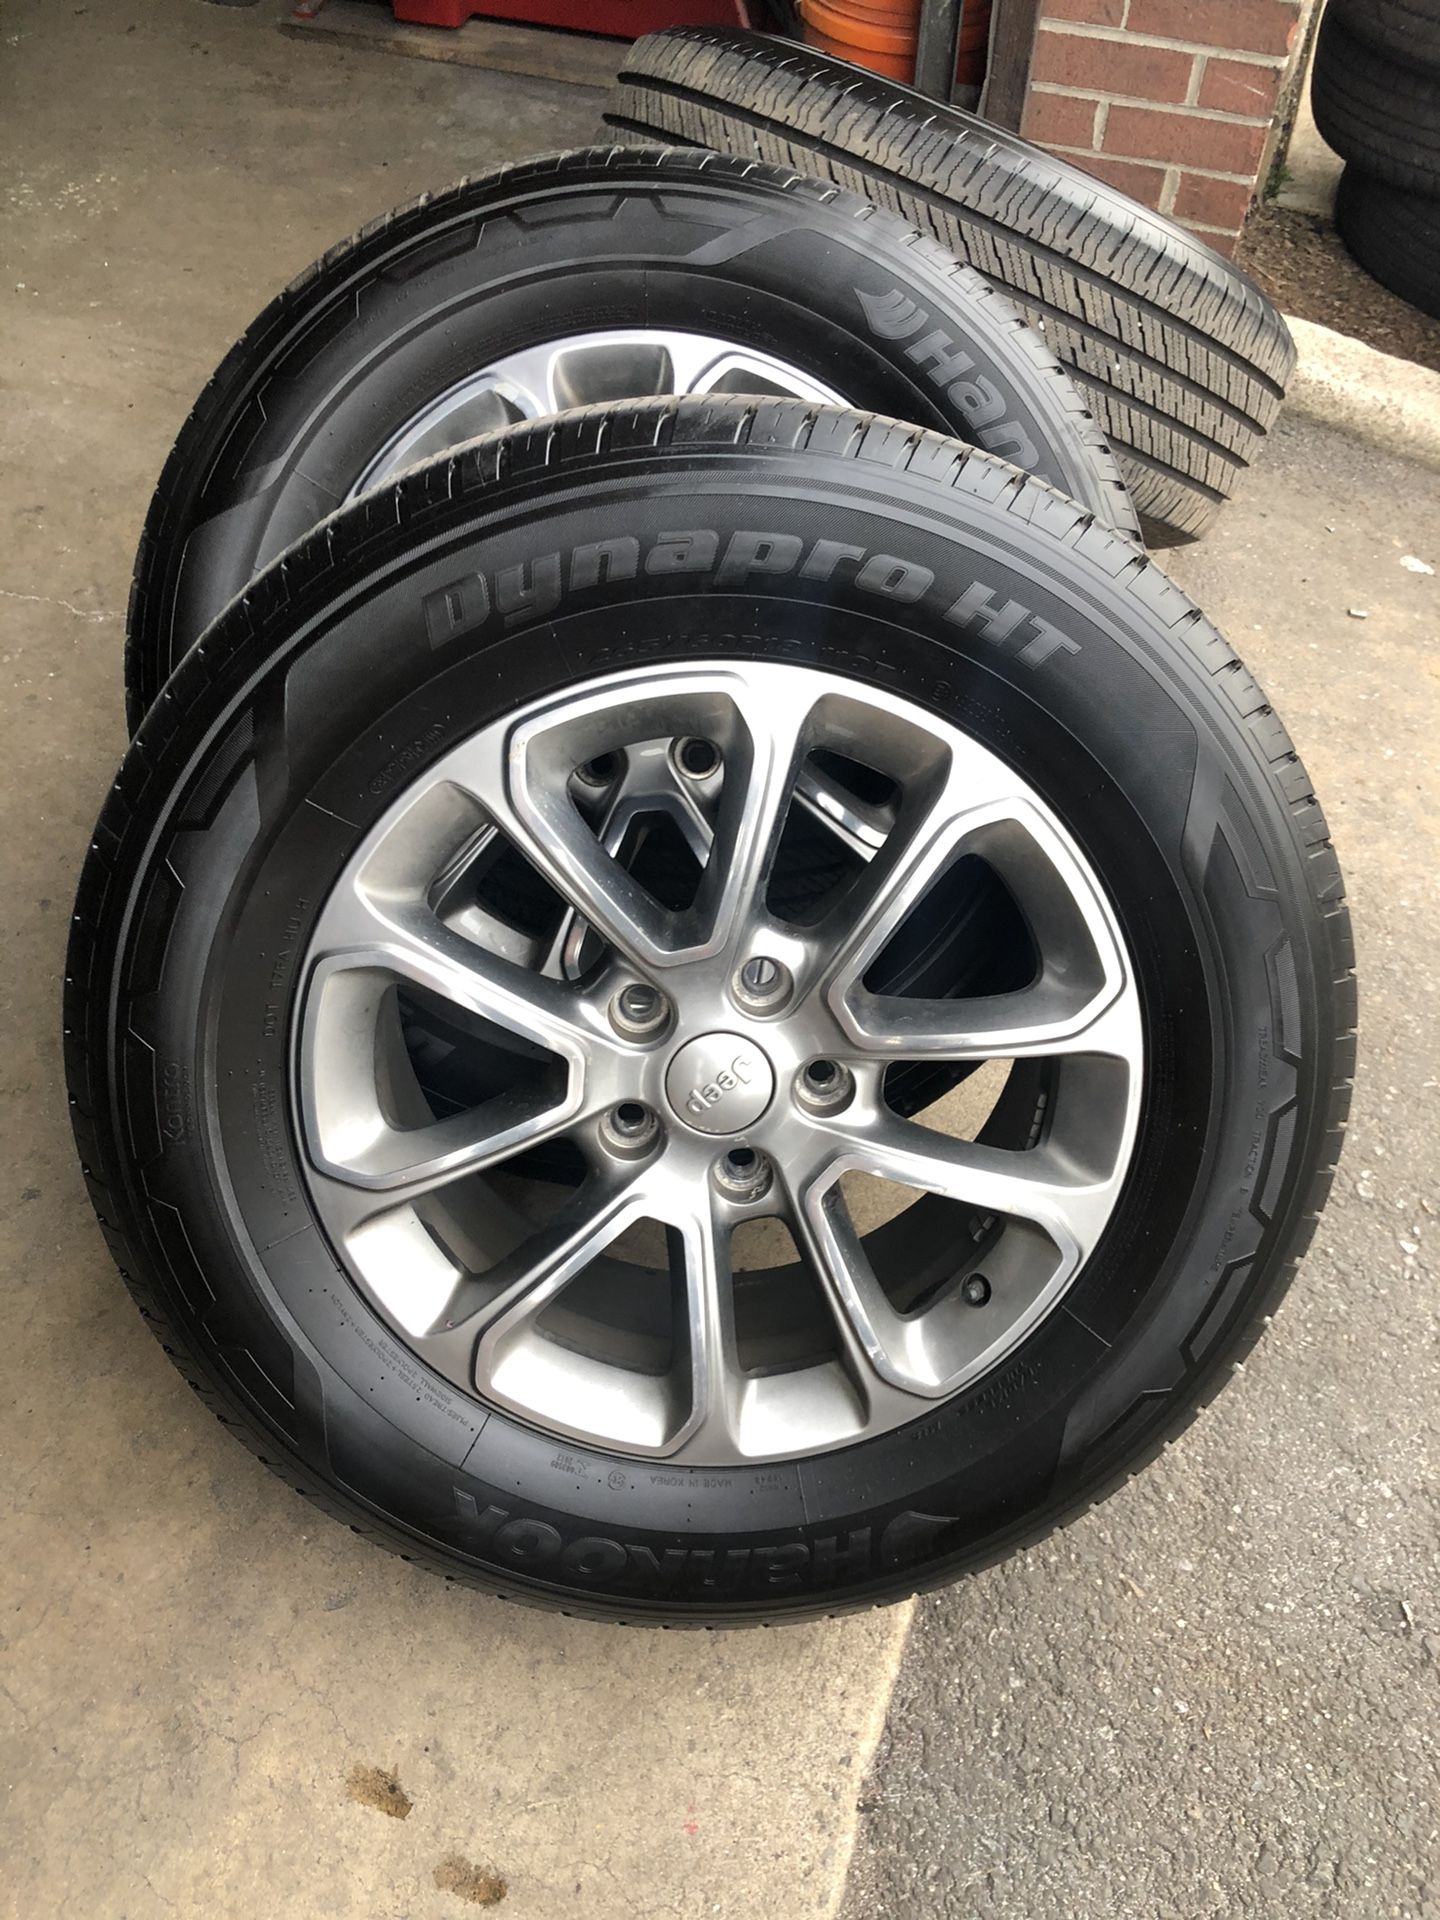 Jeep Grand Cherokee 18” Wheels with tires